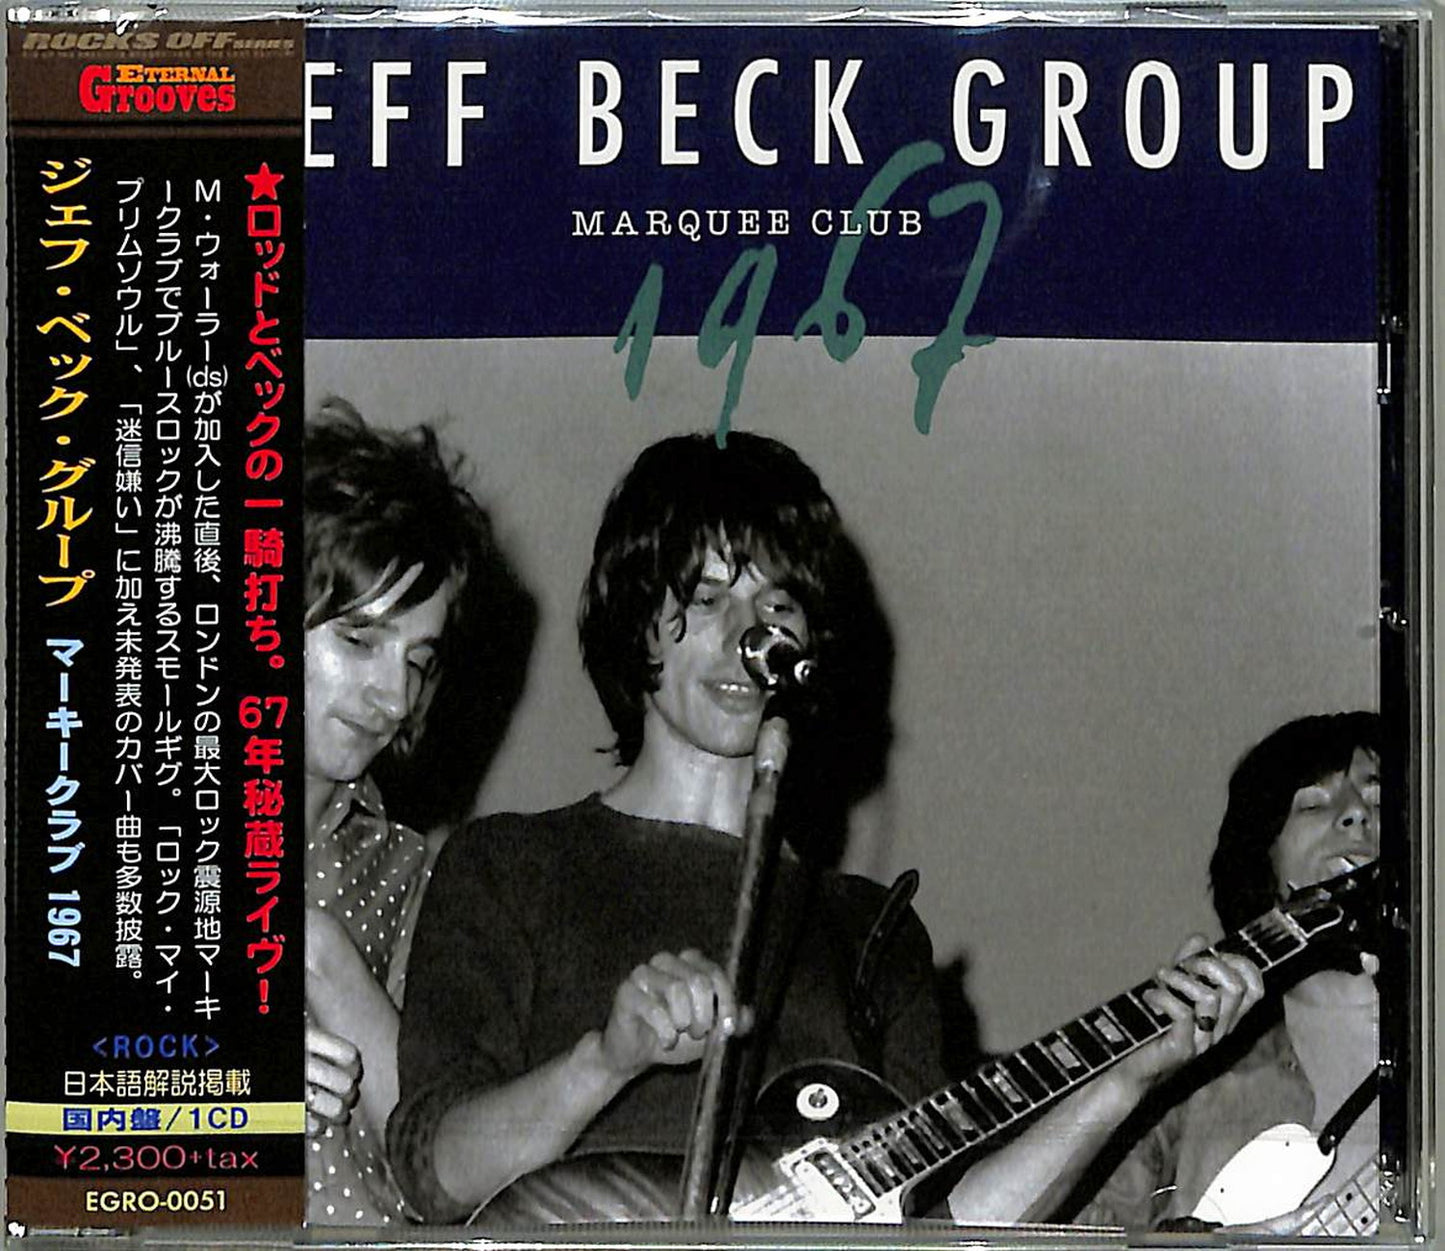 The Jeff Beck Group - Marquee Club 1967 - Japan CD